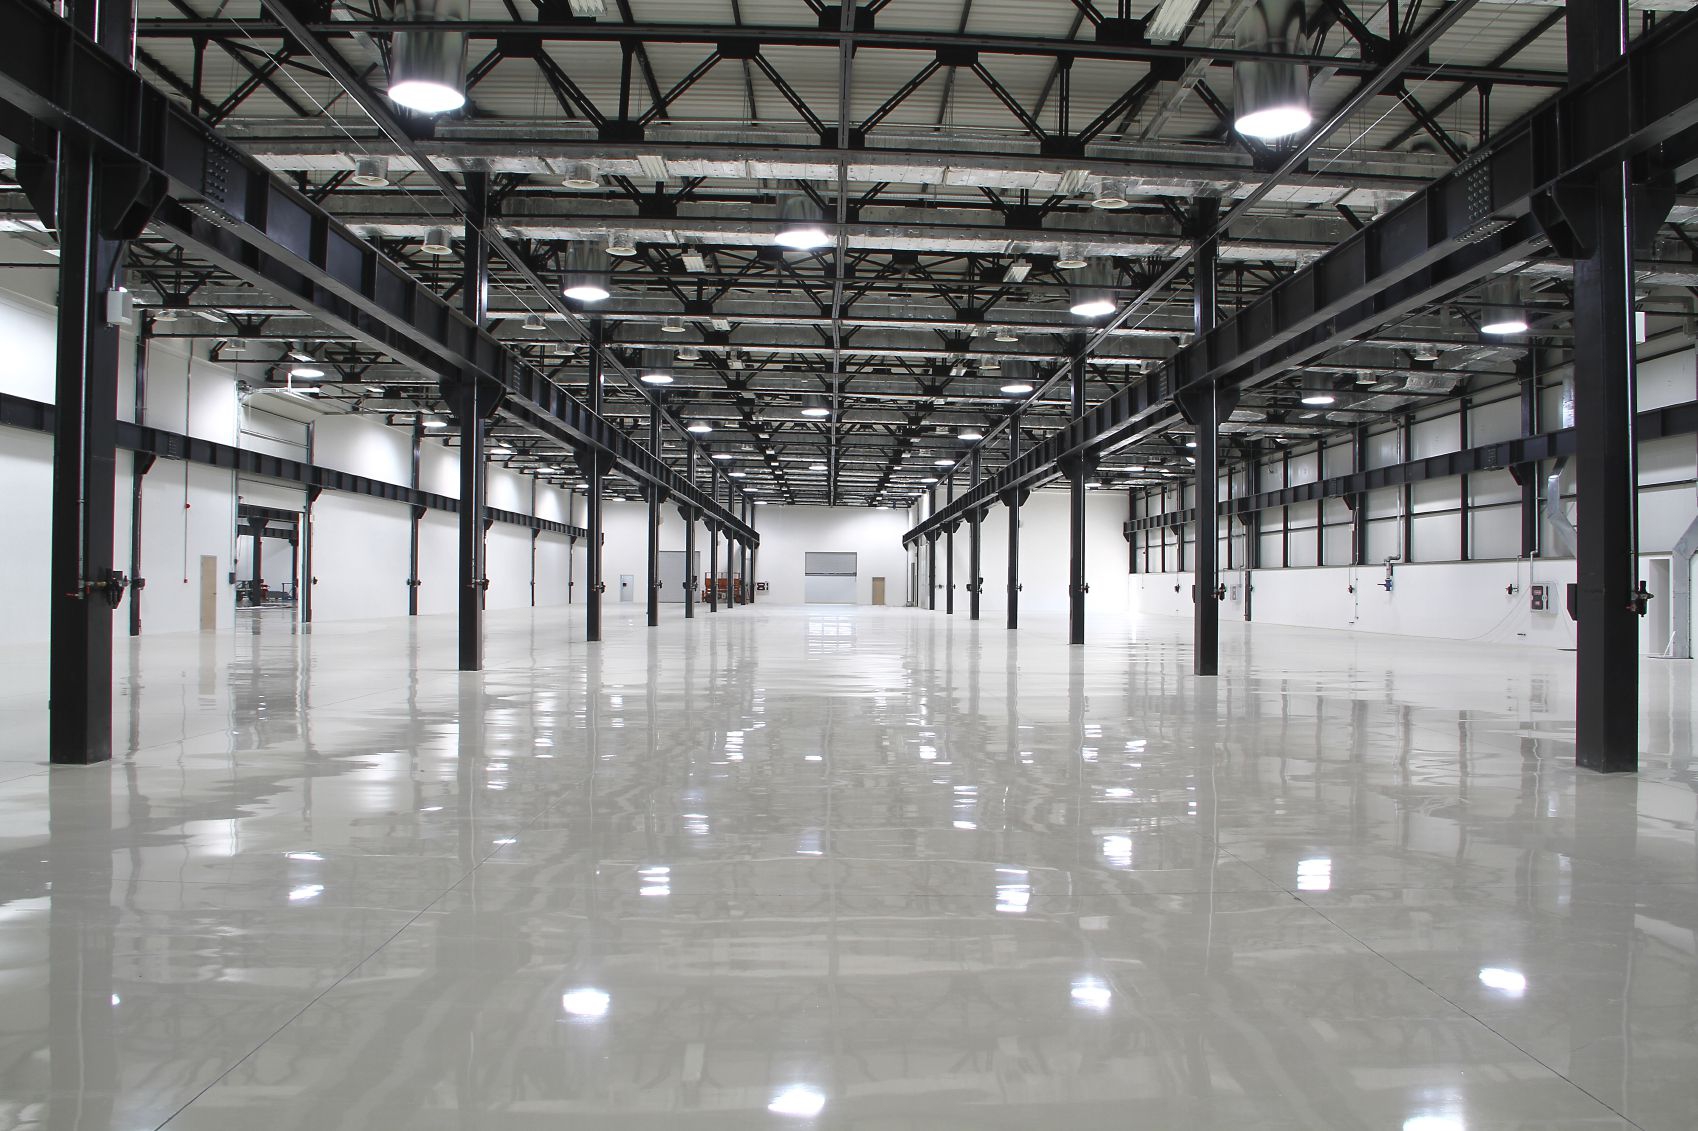 Factory clearances can be a challenging time. Let us help you get your premises perfectly clean.